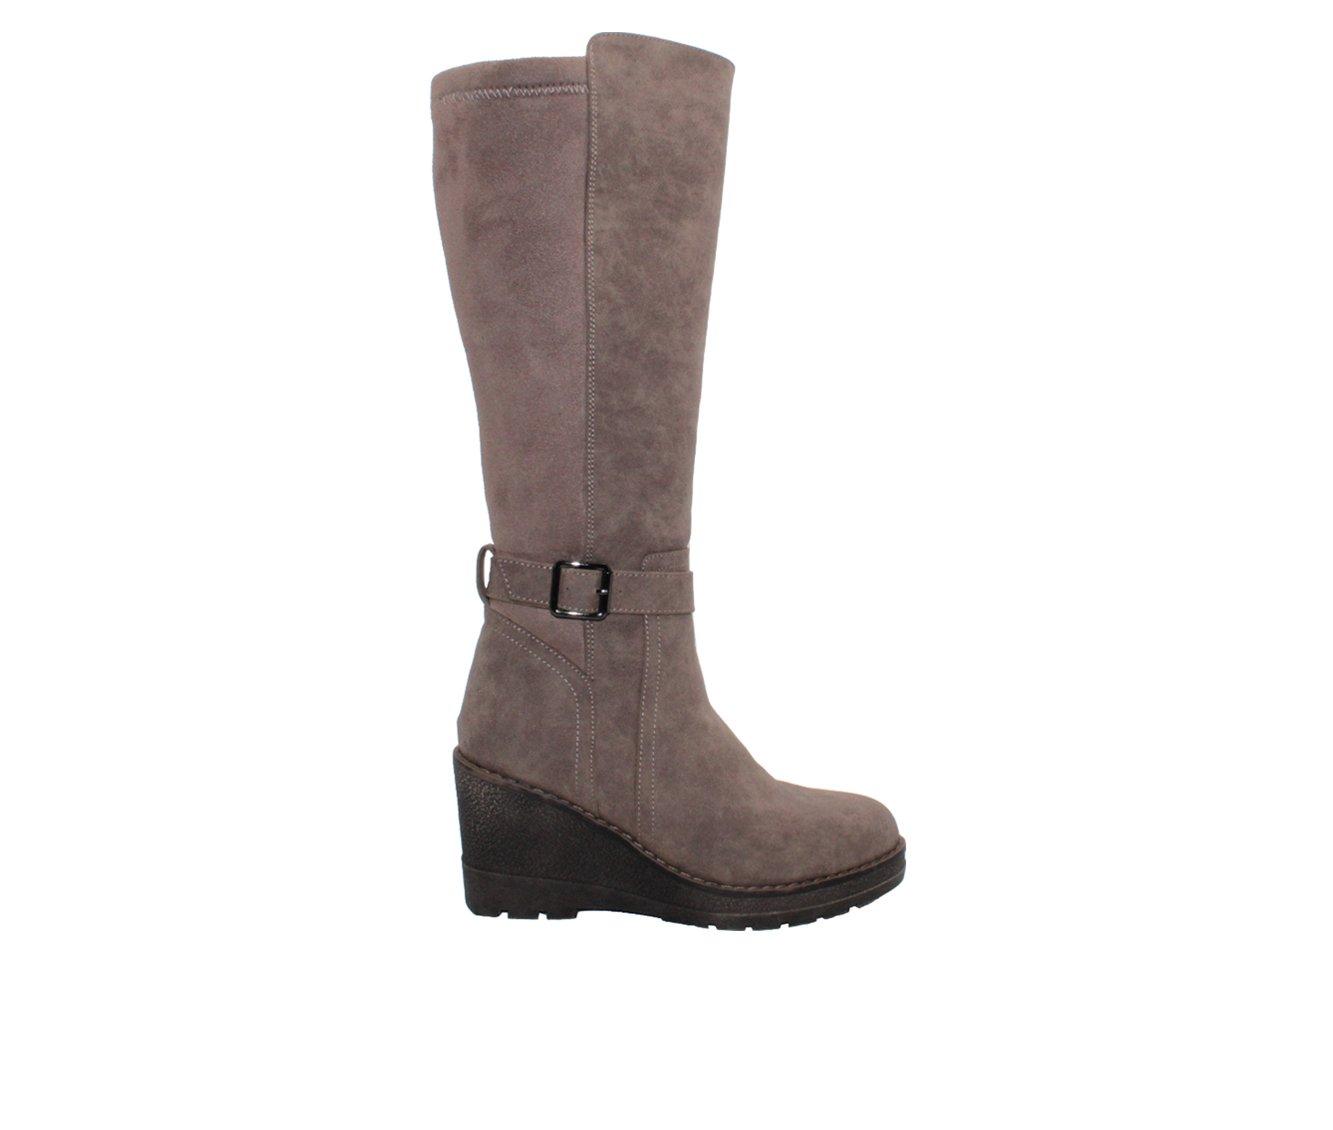 Women's Volatile Cabrillo Wedged Knee High Boots